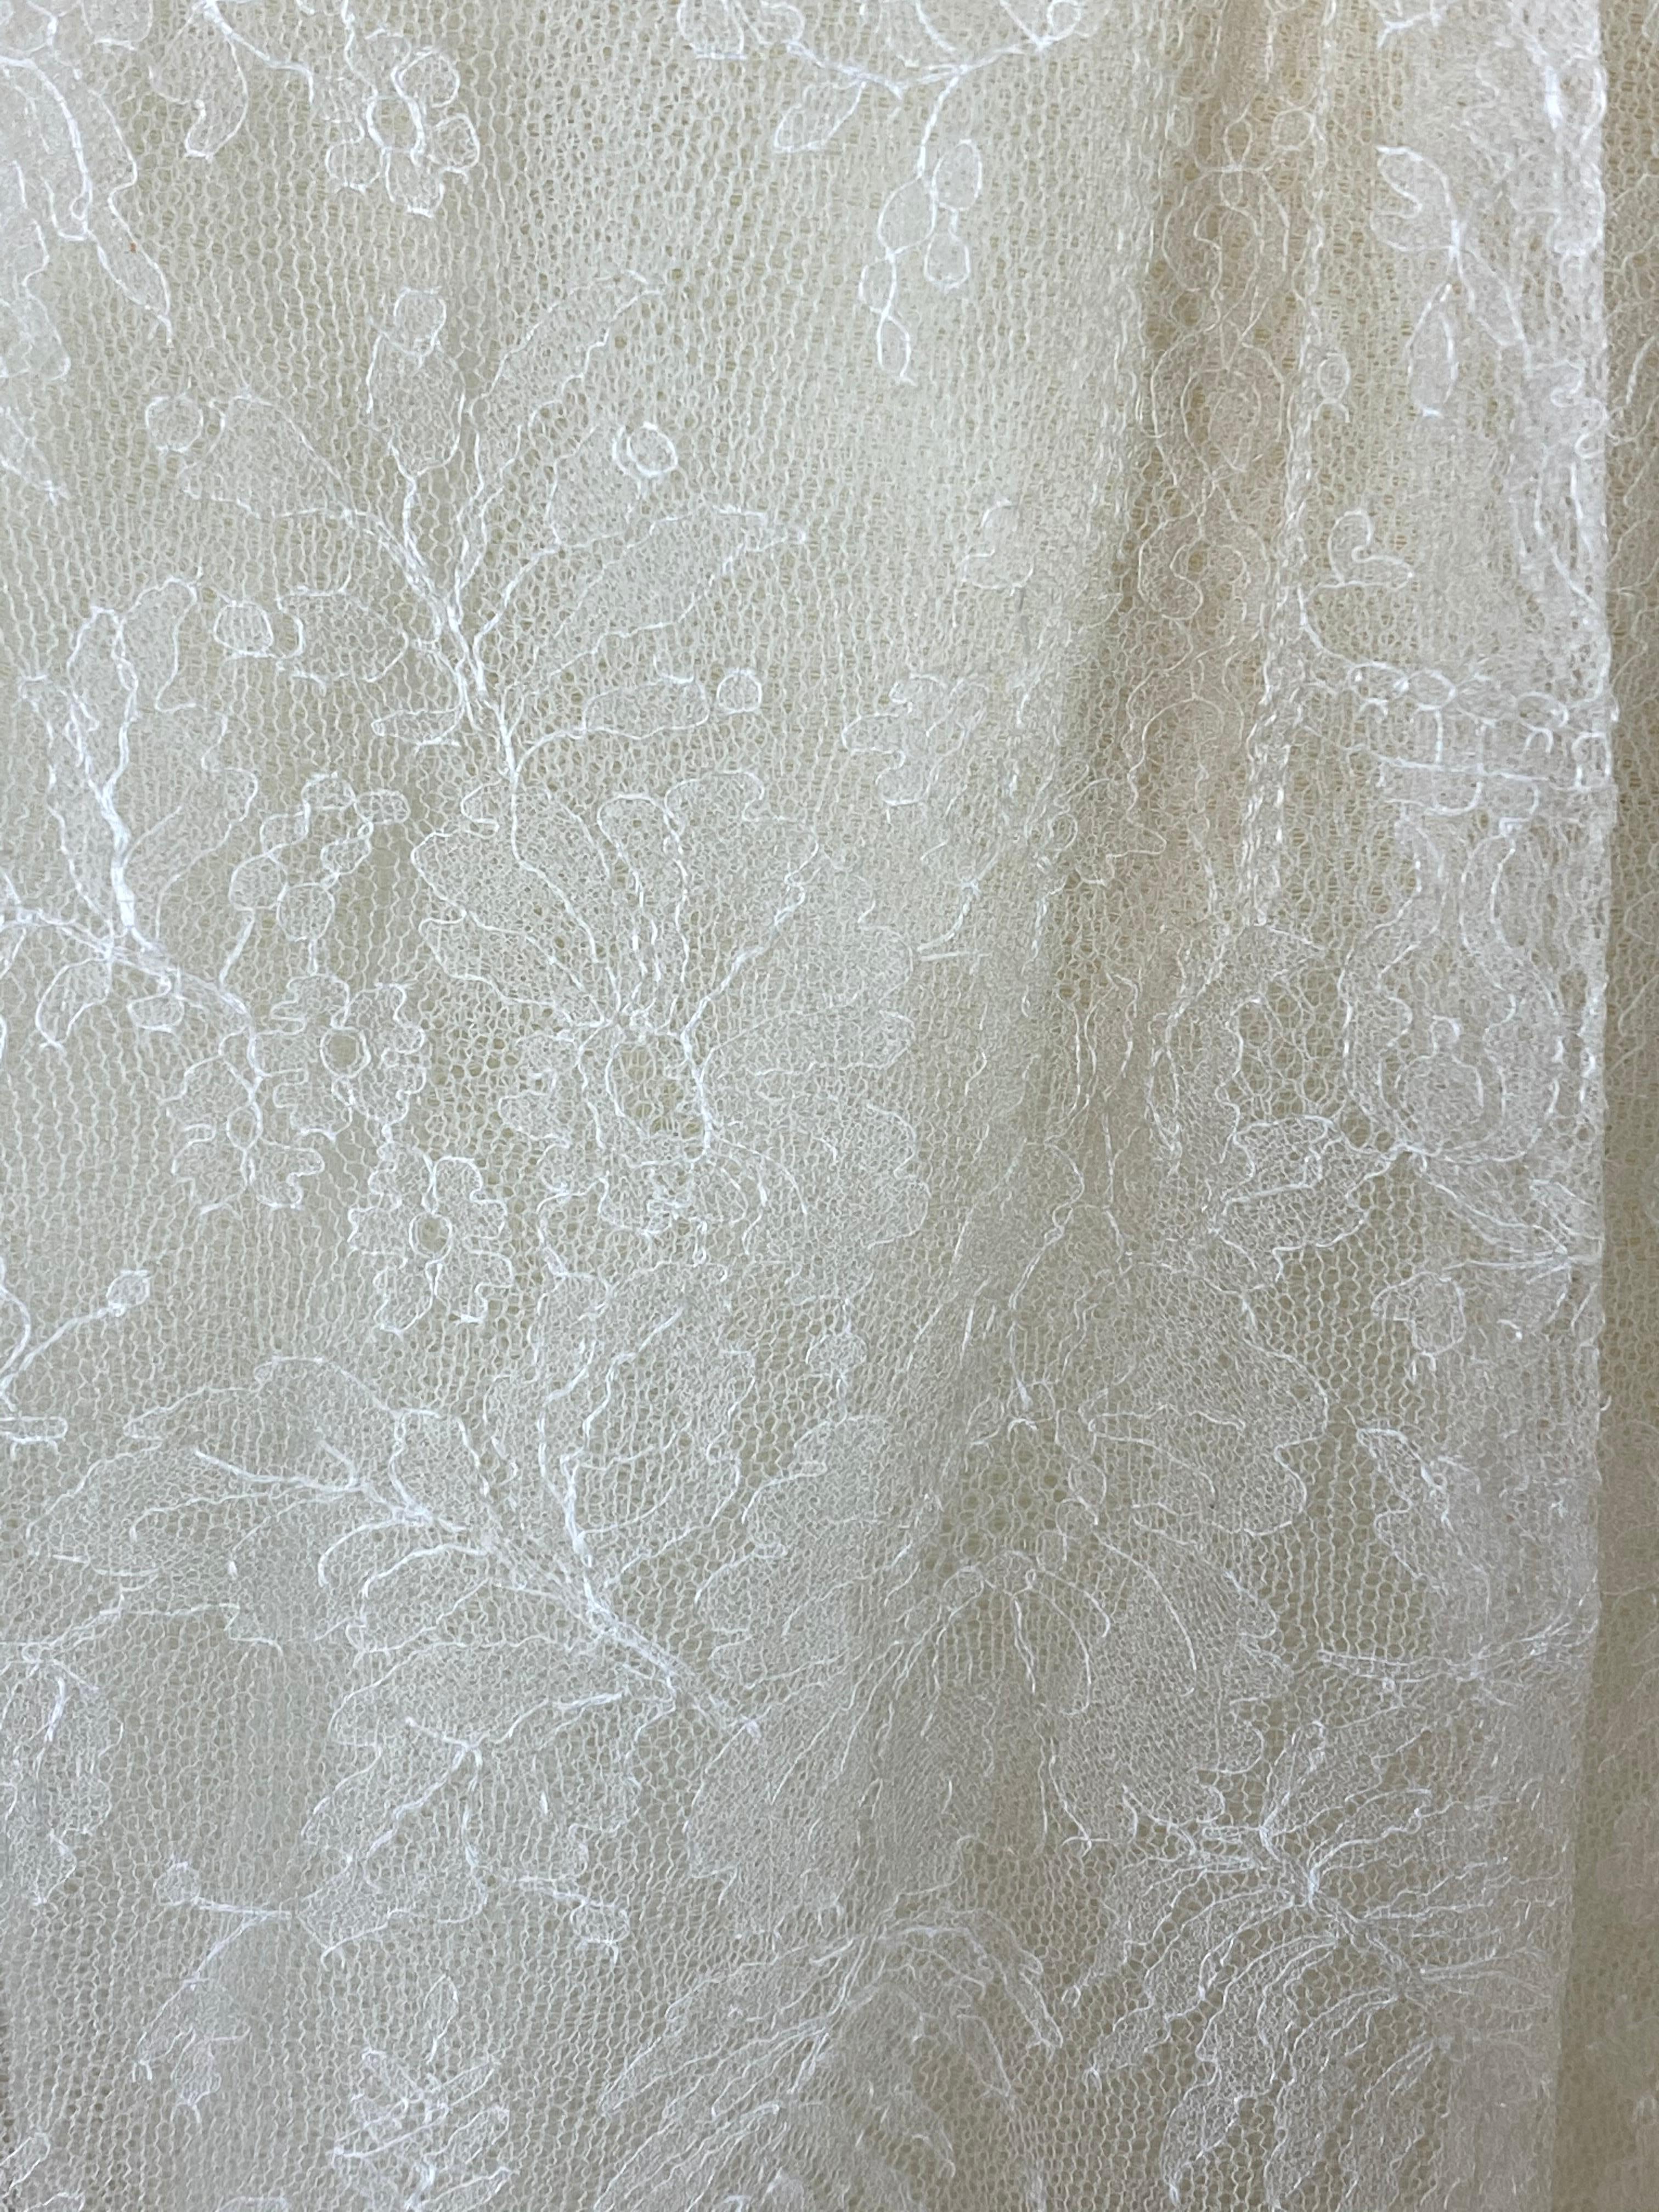 1900s Lanvin Ivory Cream Floral Lace Sleeveless Midi Dress  In Fair Condition For Sale In Beverly Hills, CA